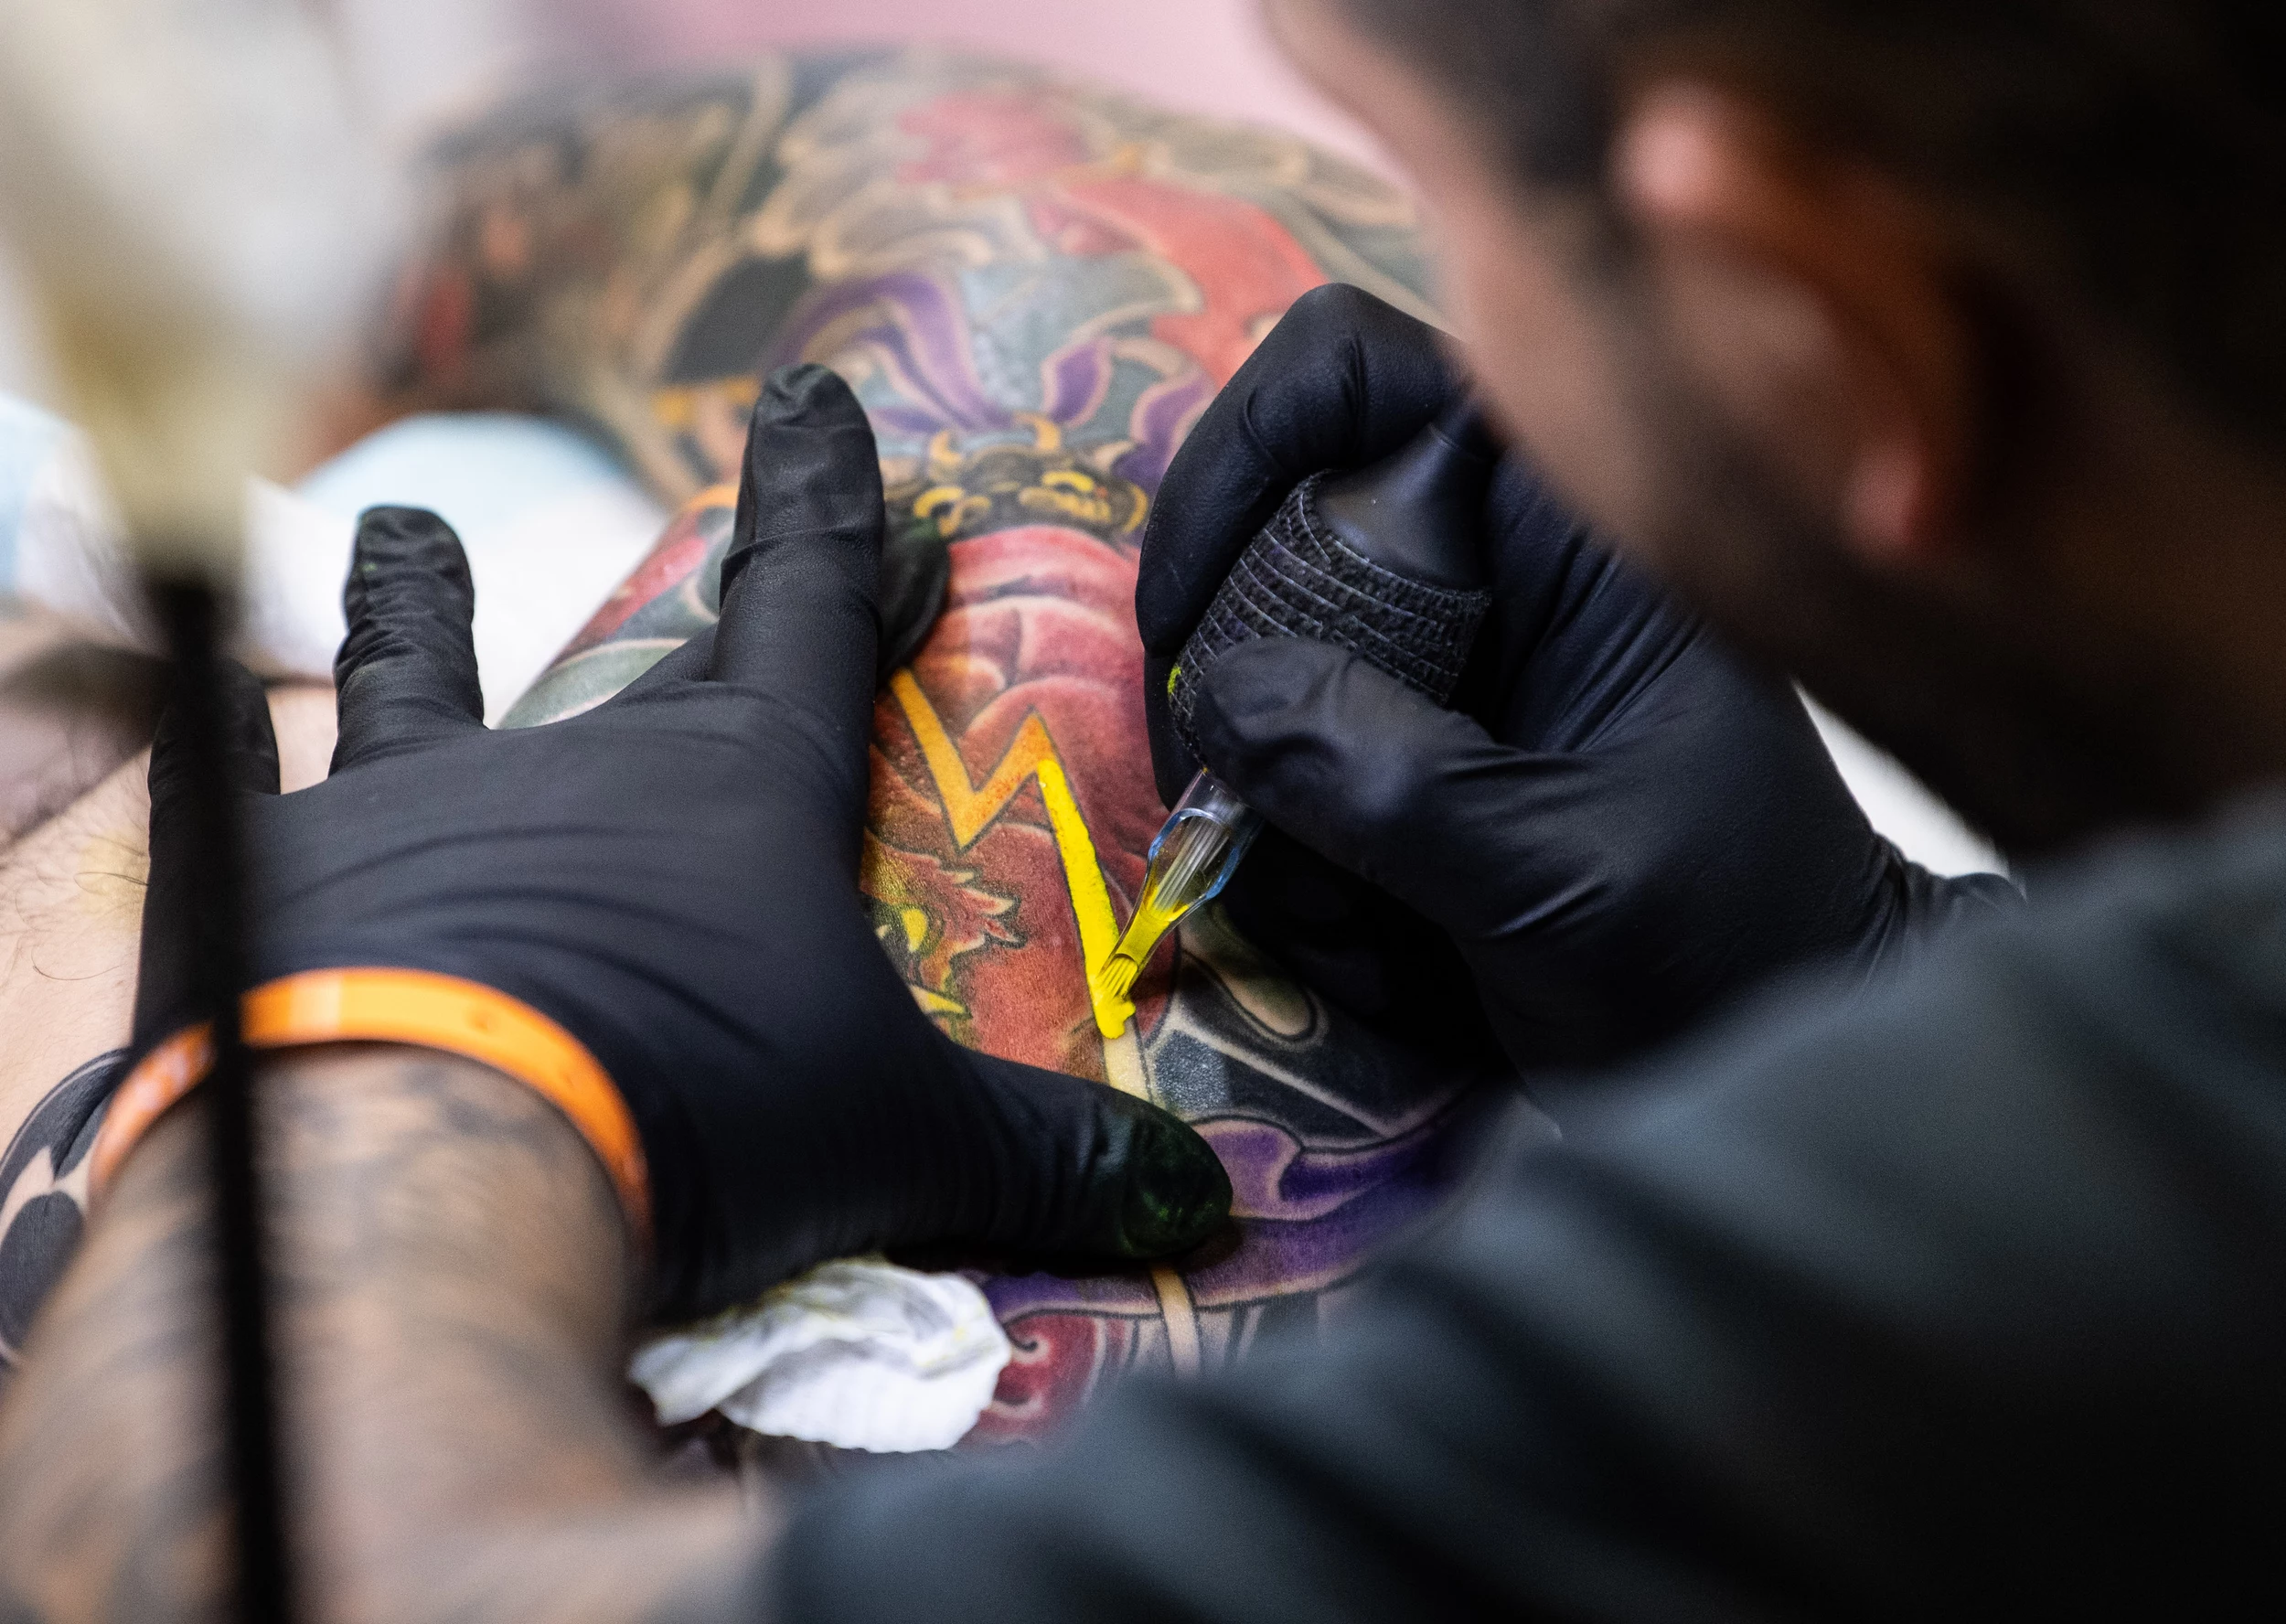 Local tattoo artists praised as best in the world